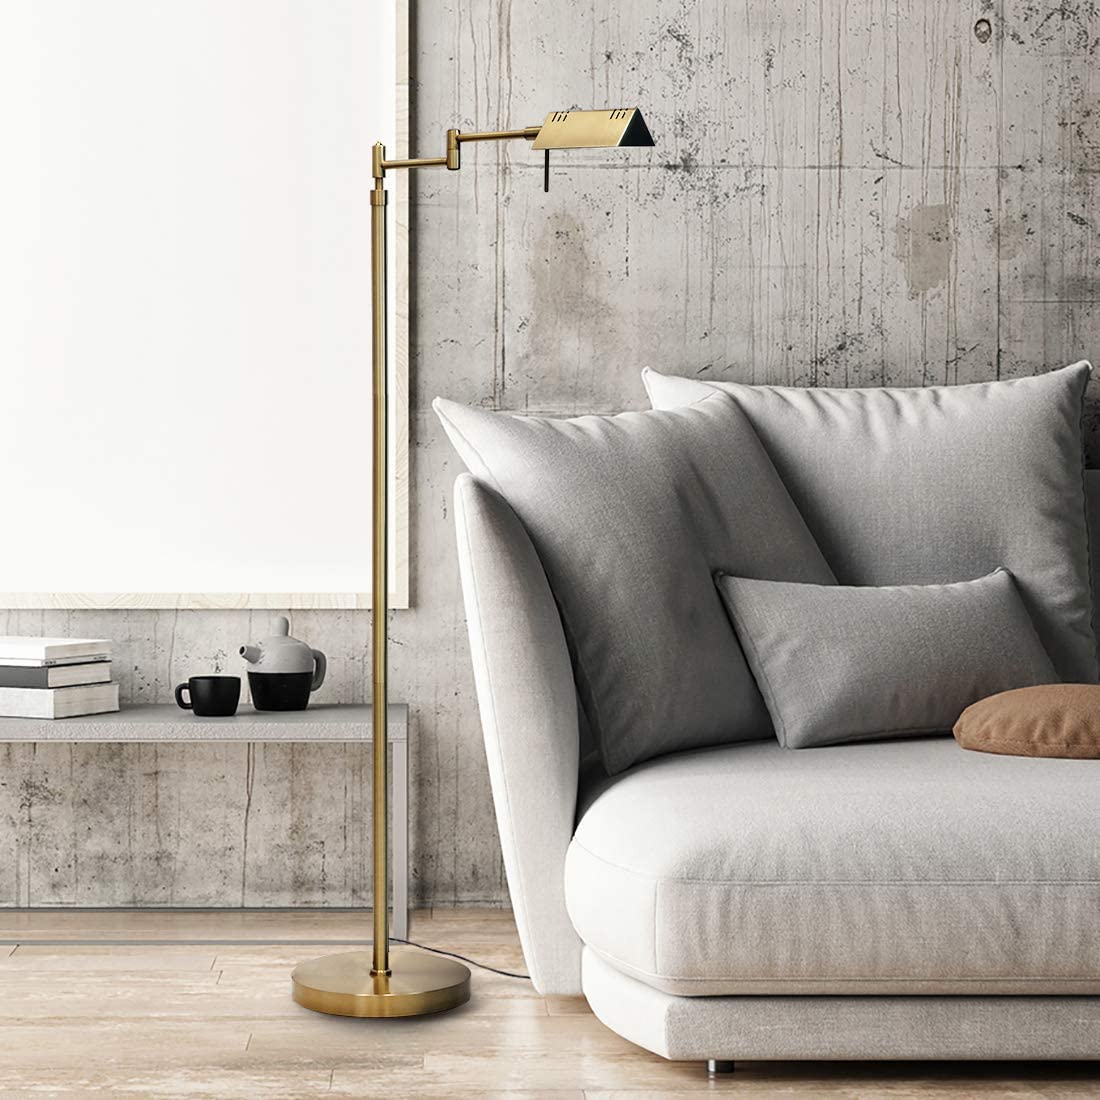 Top 7 New AFFORDABLE Amazon Home Decor Finds that Look LUXURIOUS for Spring 2021